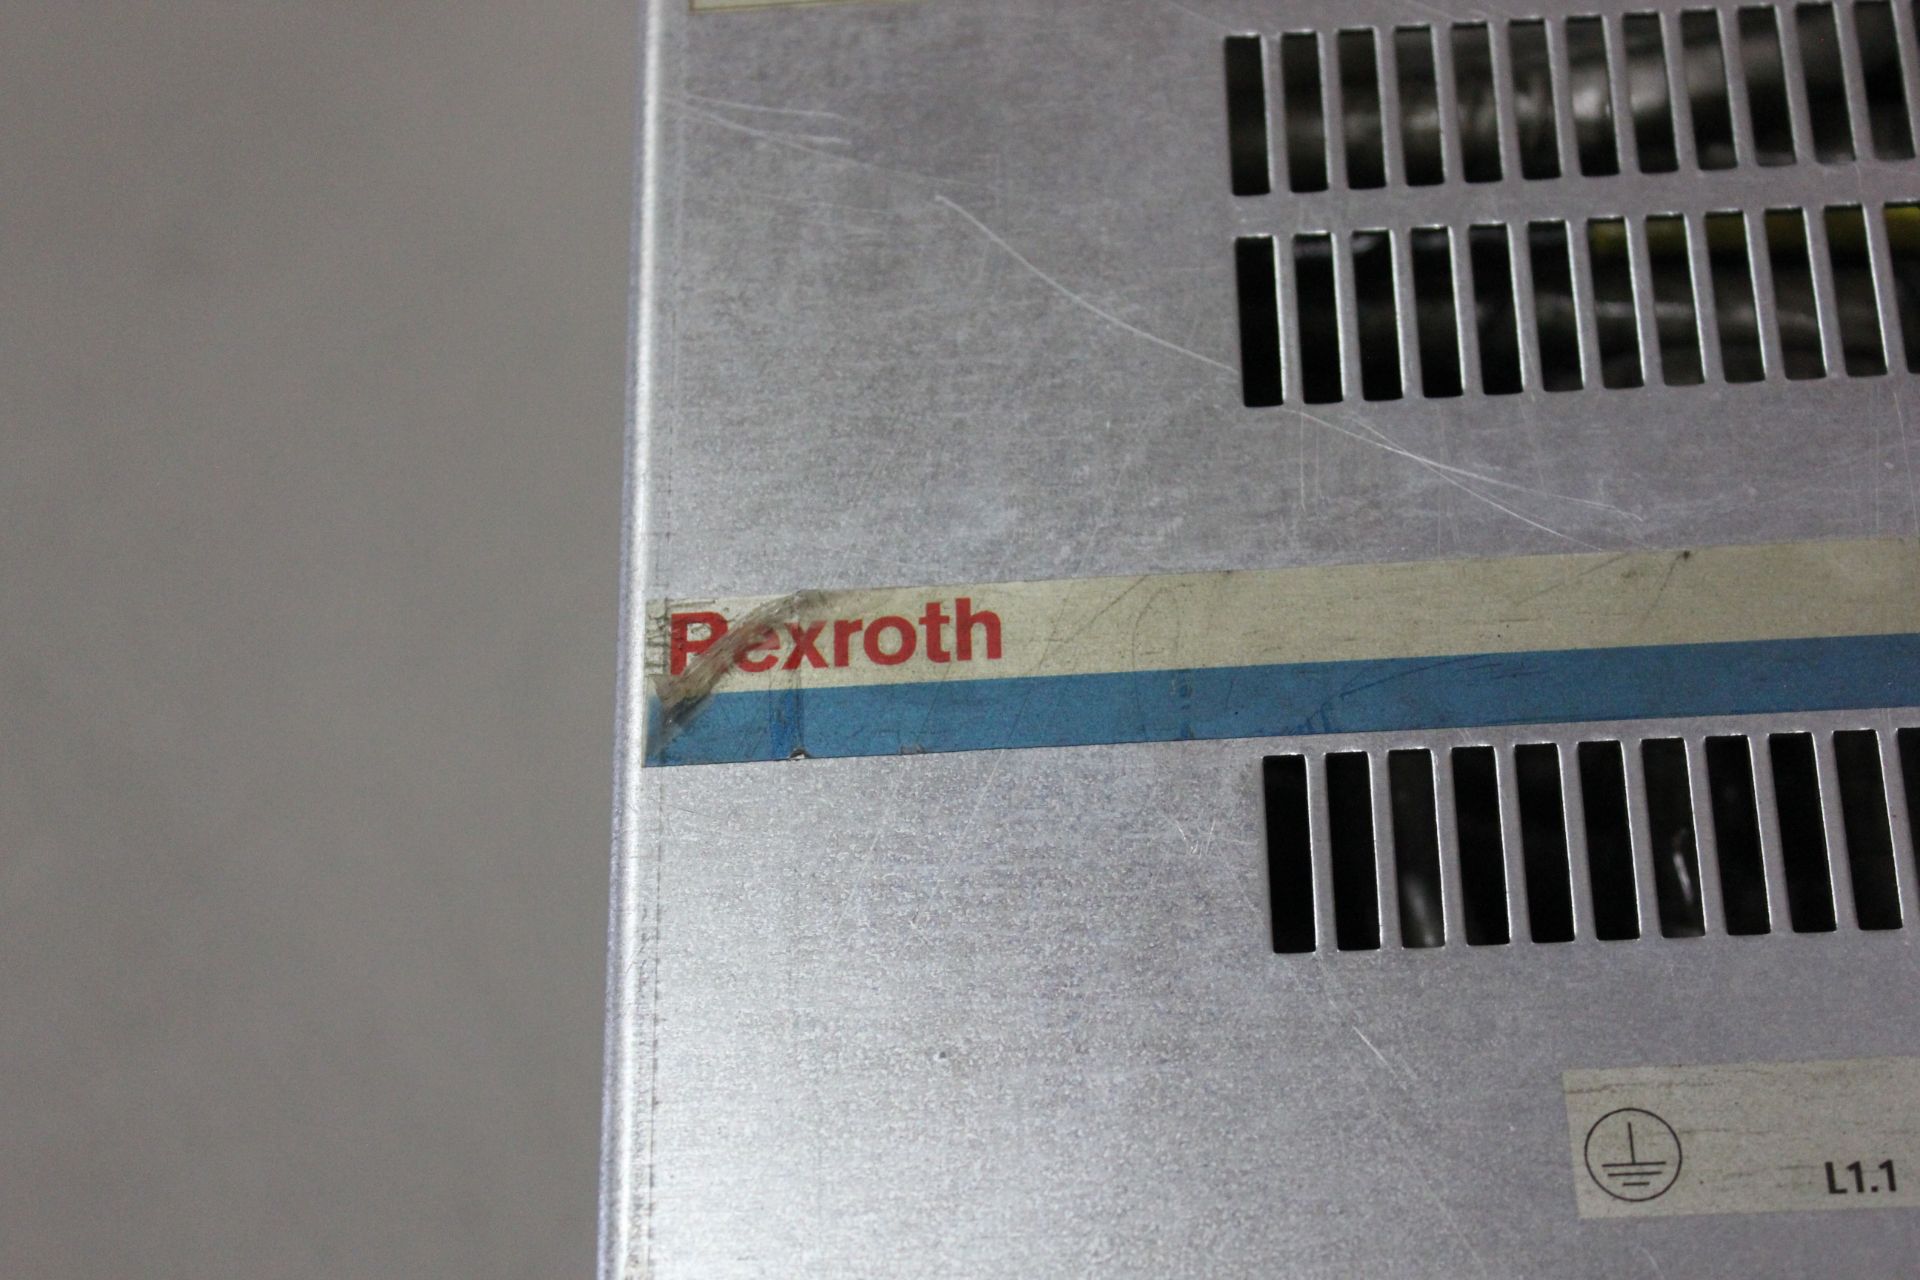 REXROTH INDRADRIVE MAINS FILTER - Image 2 of 6